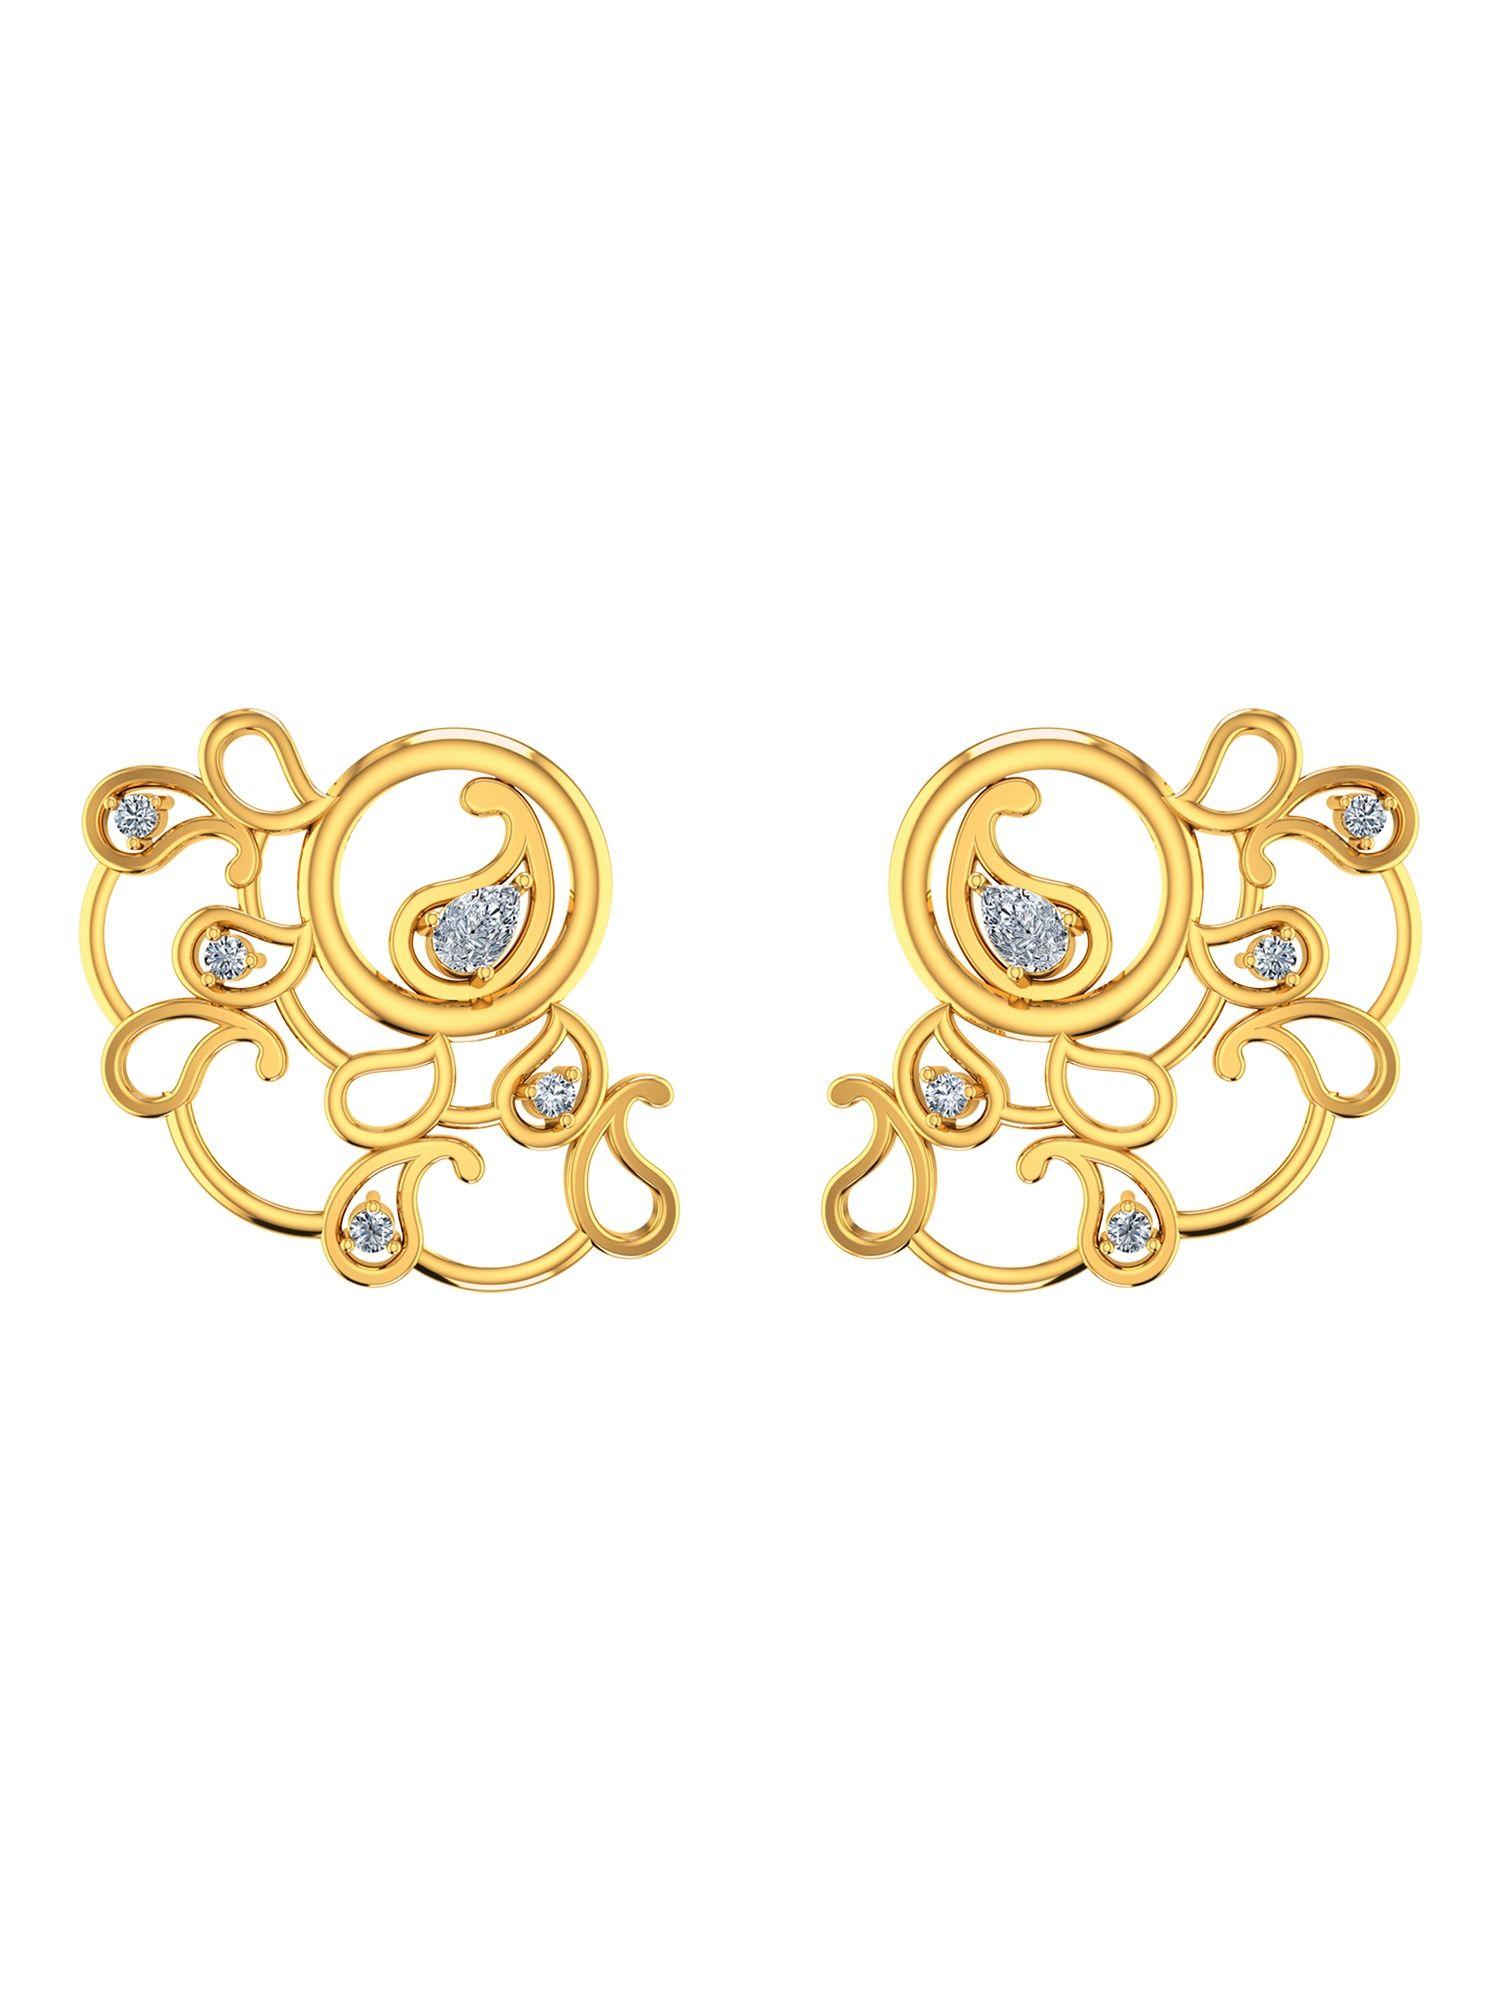 boteh stud gold earrings with silicone push